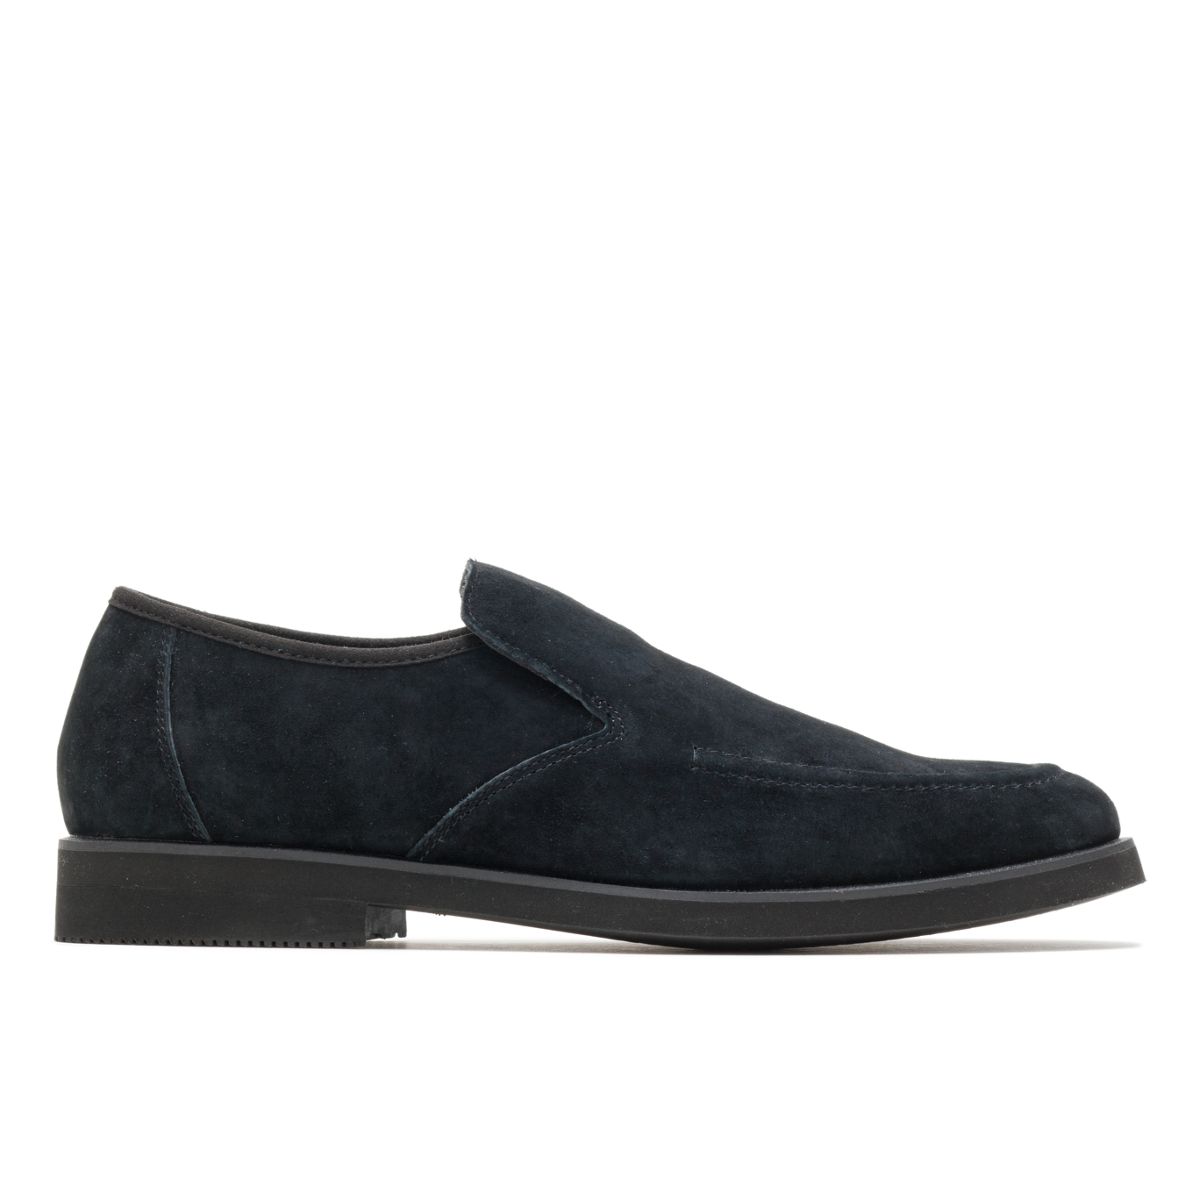 hush puppies shoes suede